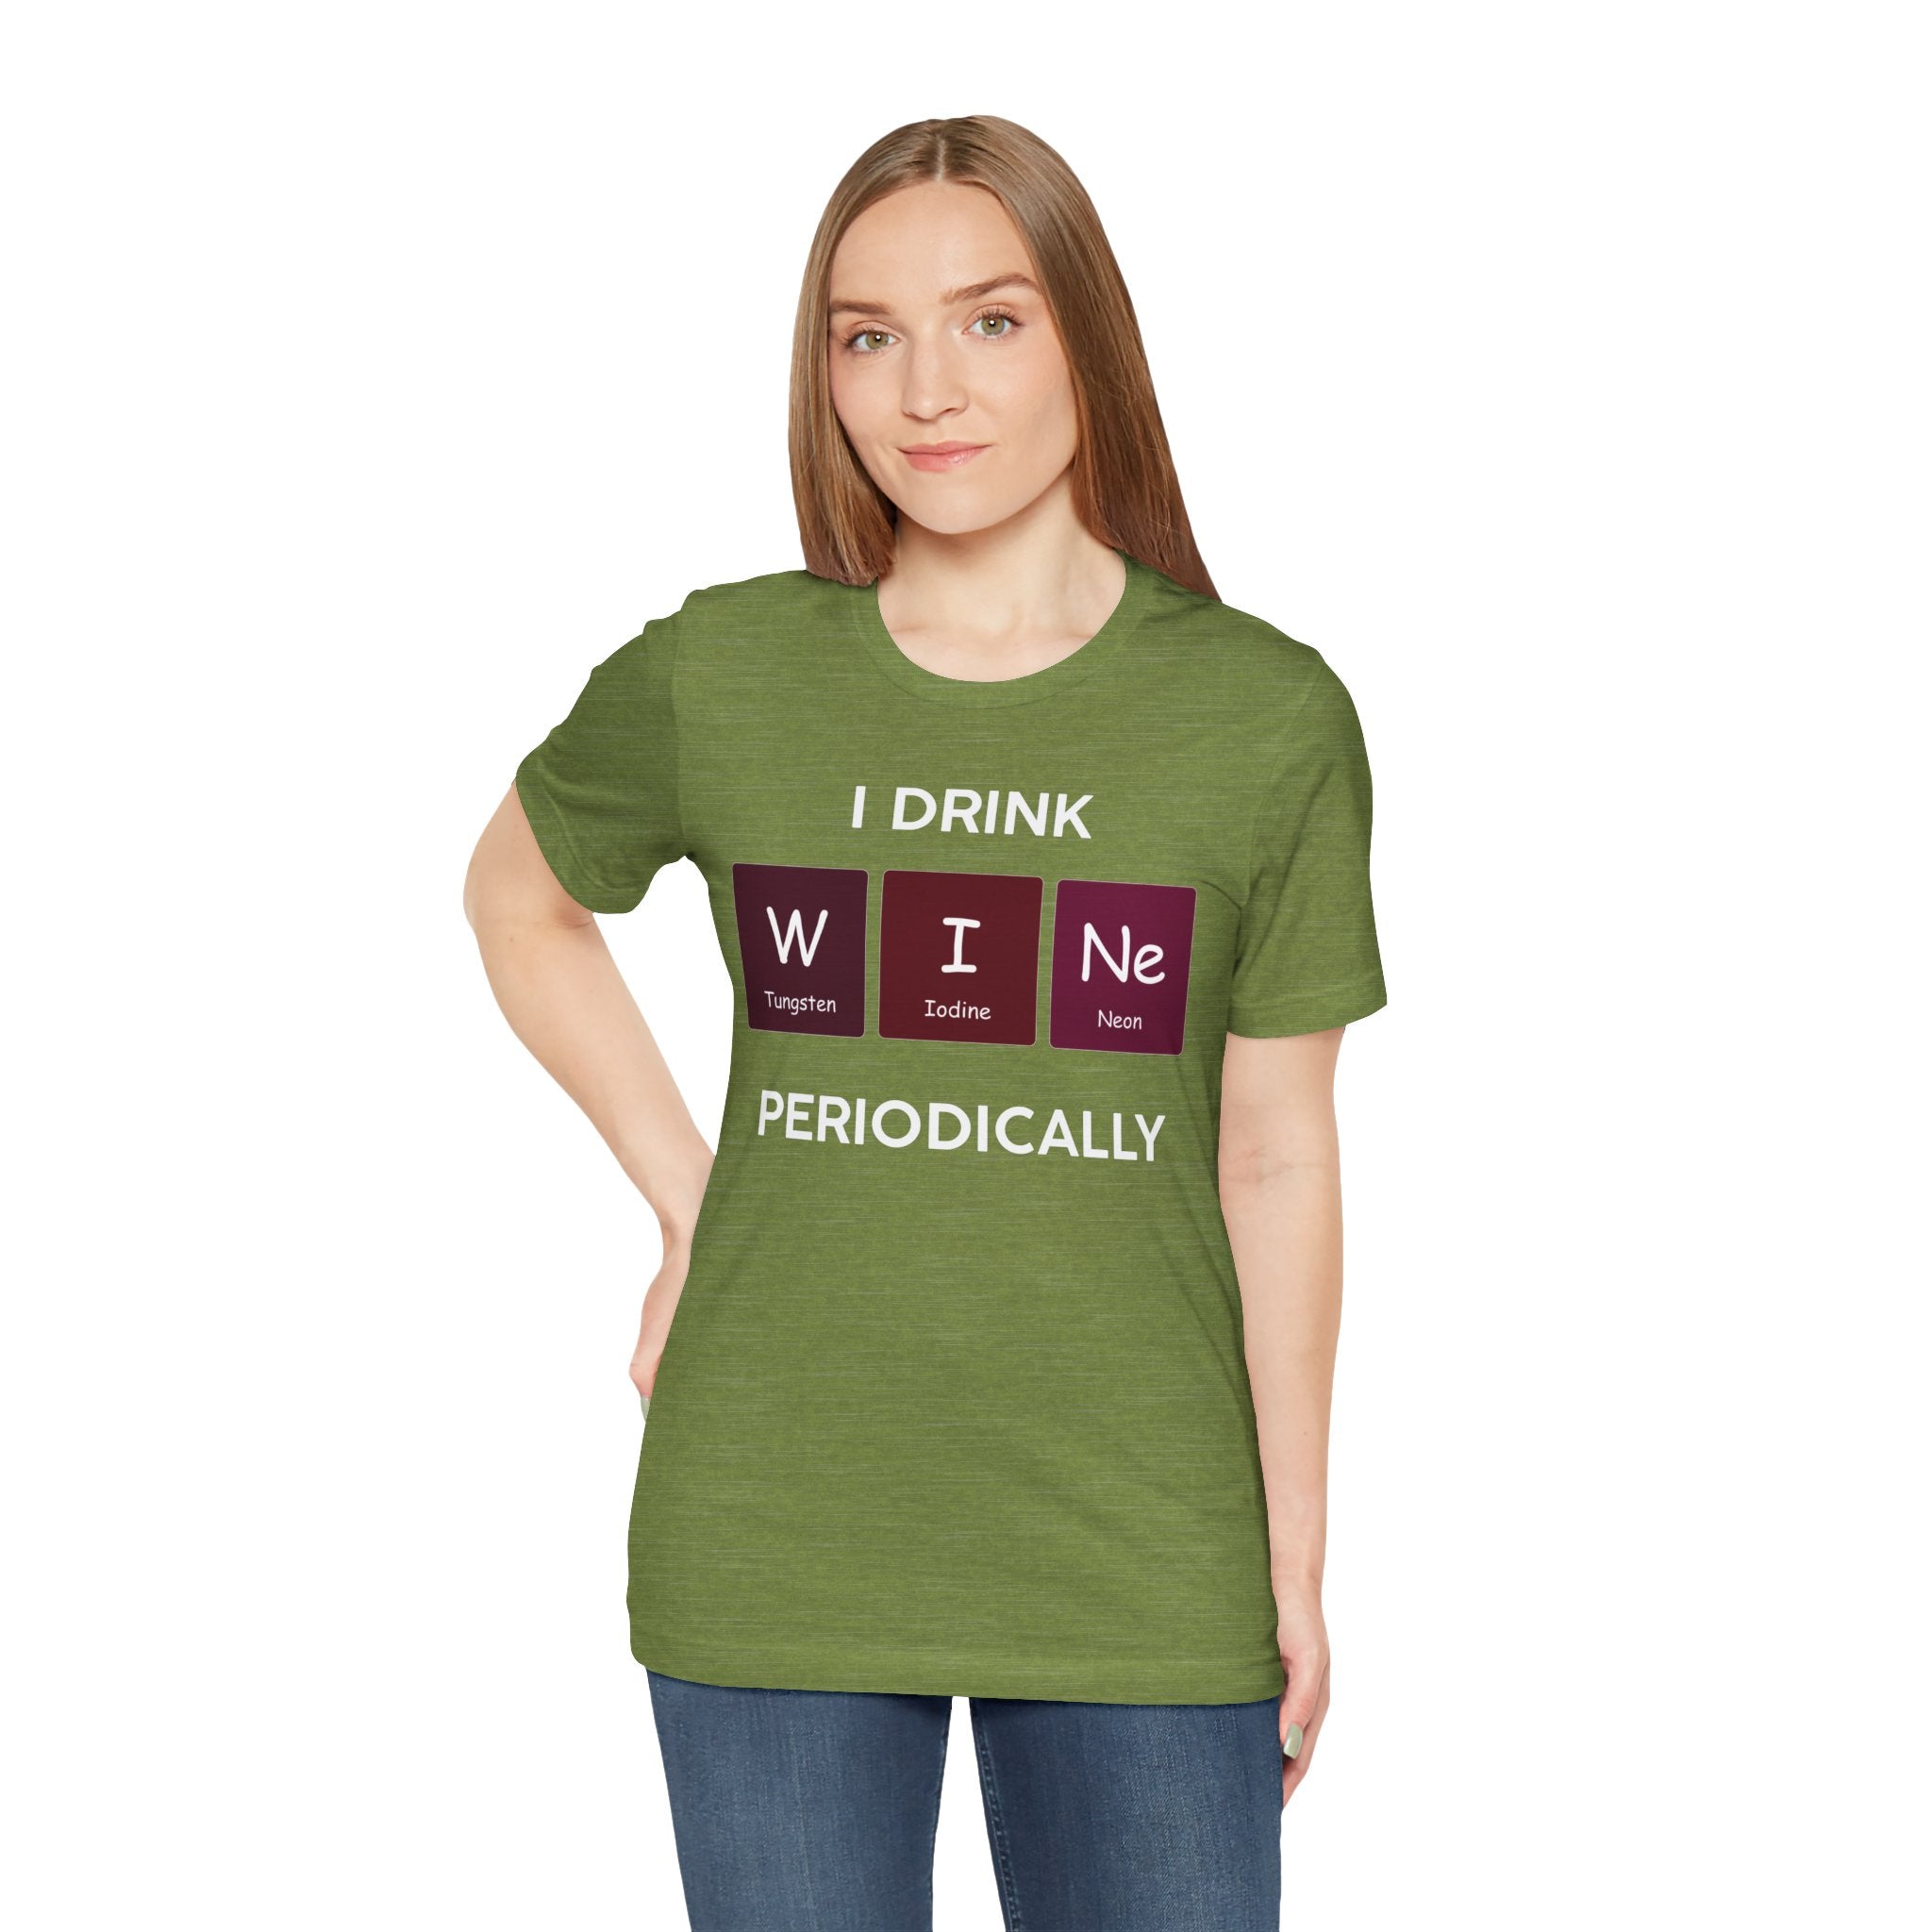 Woman in a soft cotton, green t-shirt with the text "I Drink W-I-Ne" featuring the periodic table elements for tungsten, iodine, and neon.